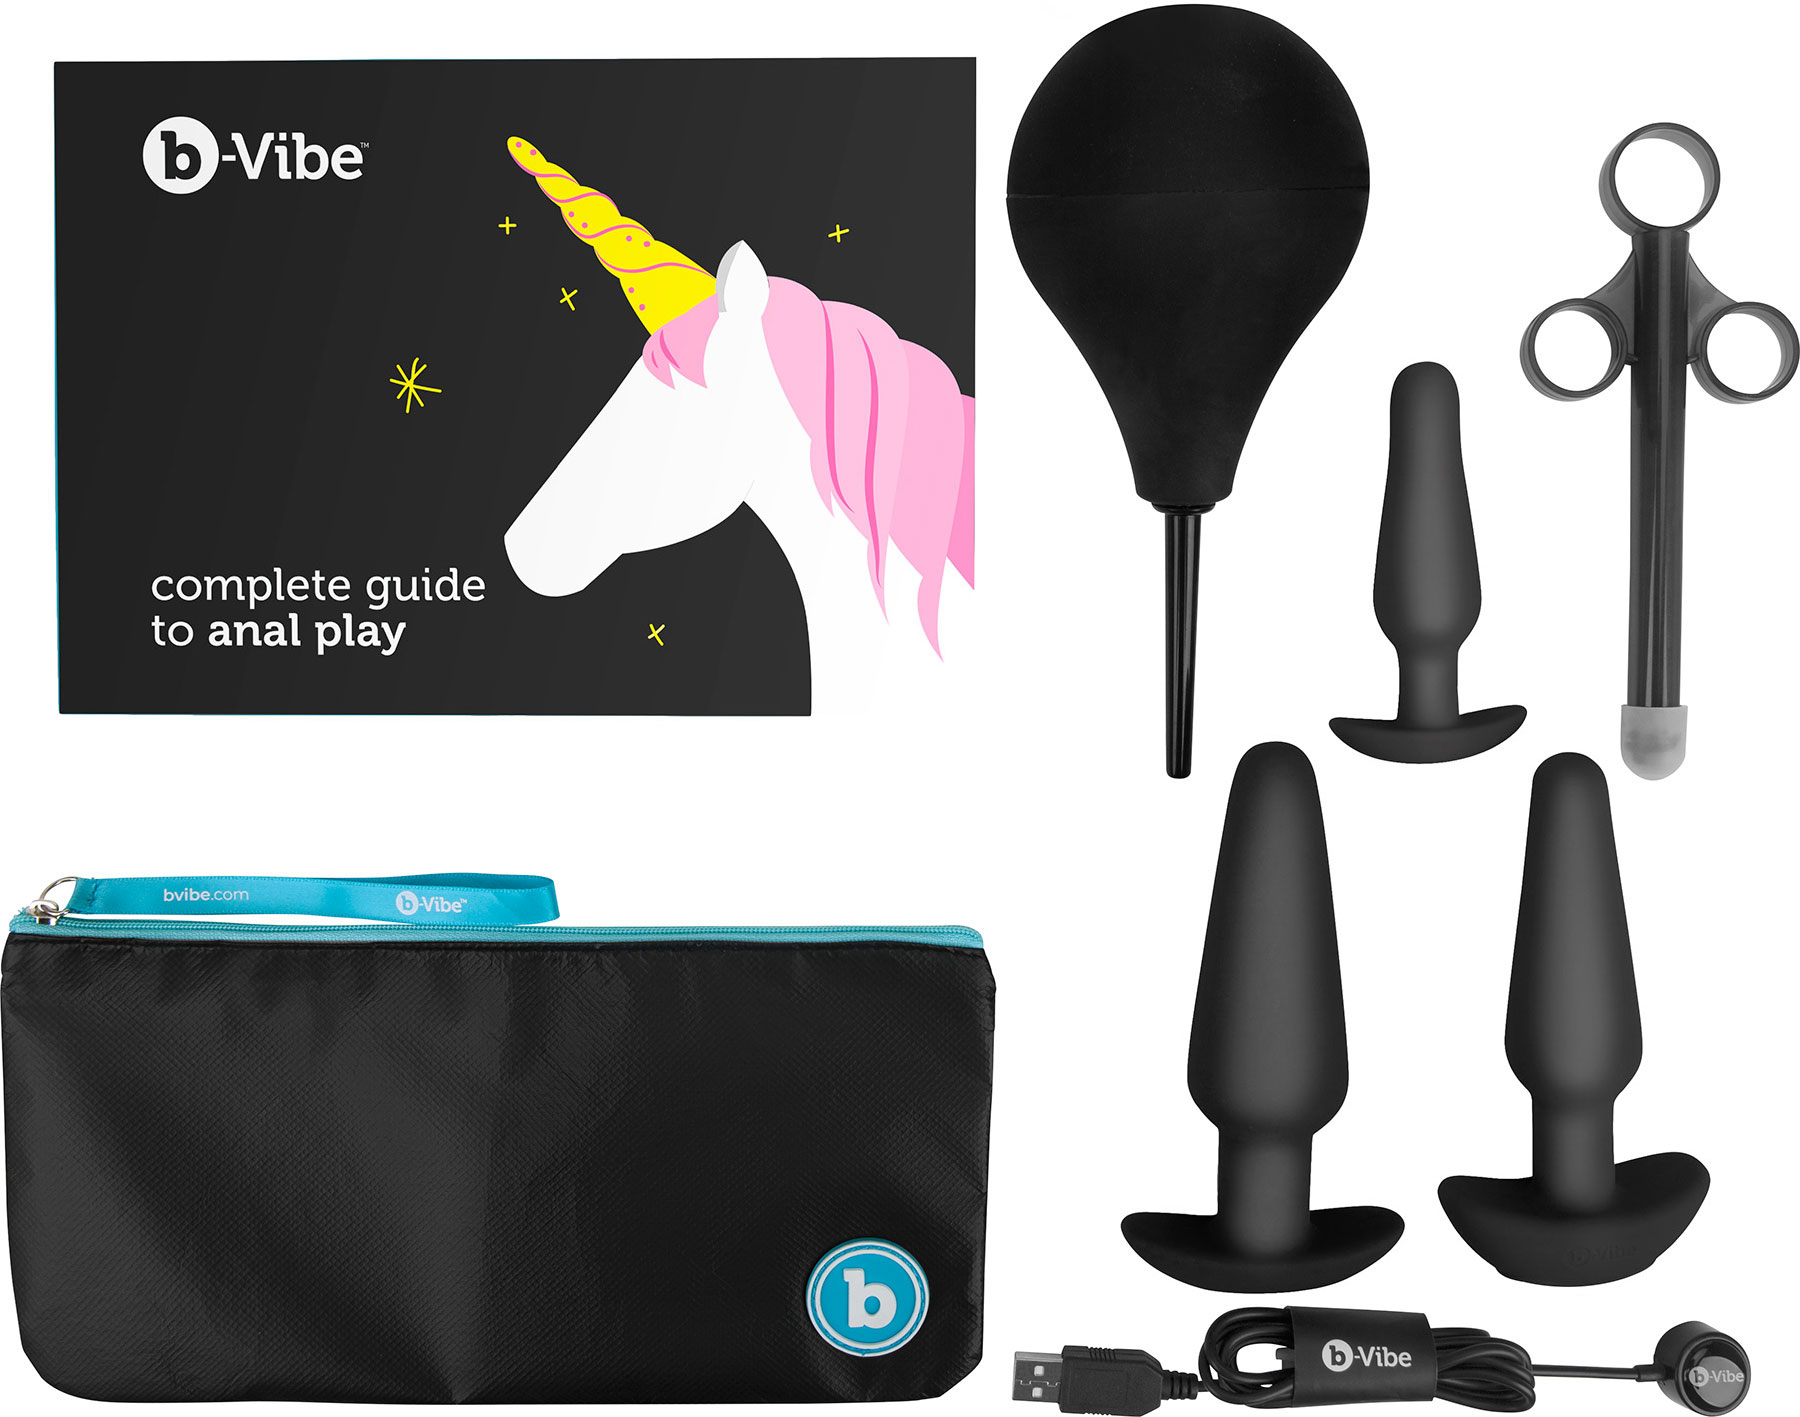 b-Vibe Anal Training & Education Set - What's Included?